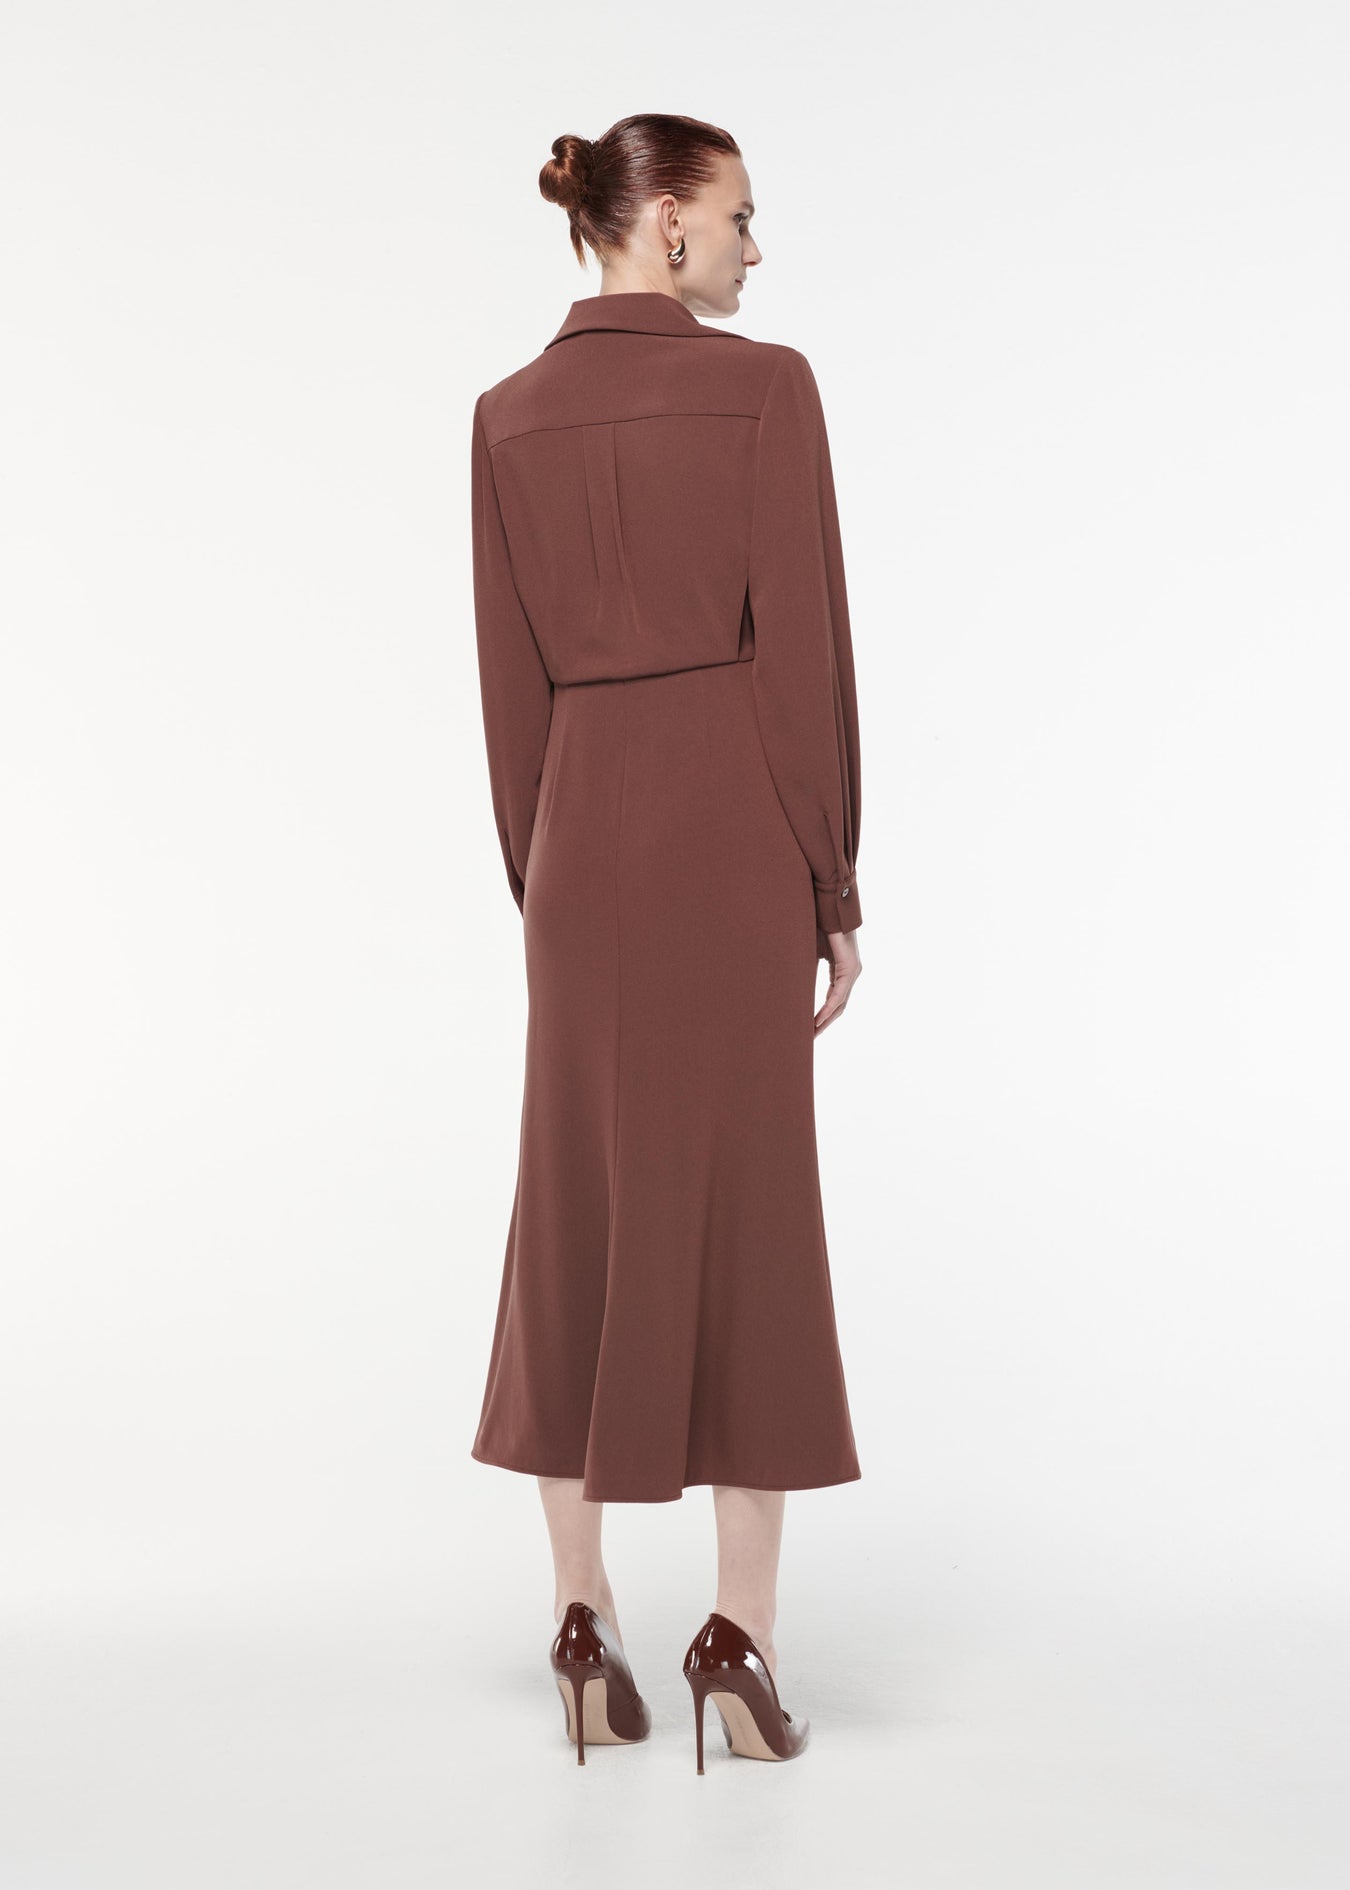 A photograph of a woman wearing a Long Sleeve Satin Crepe Collar Midi Dress in Brown